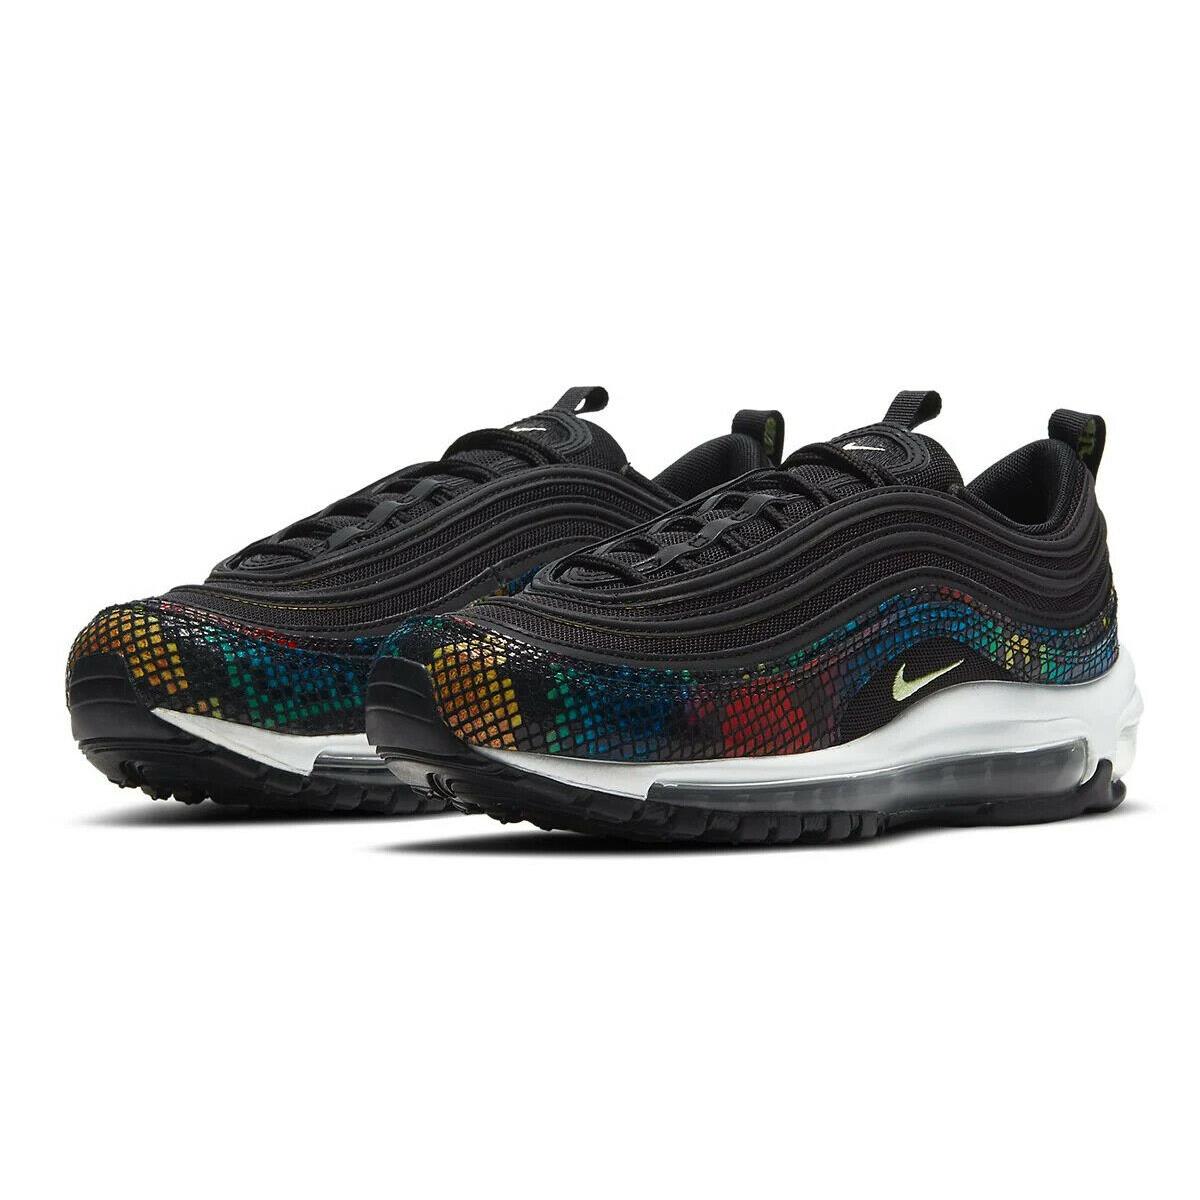 Nike Air Max 97 SE Womens Size 6.5 Sneaker Shoes CW5595 002 Rainbow Snake